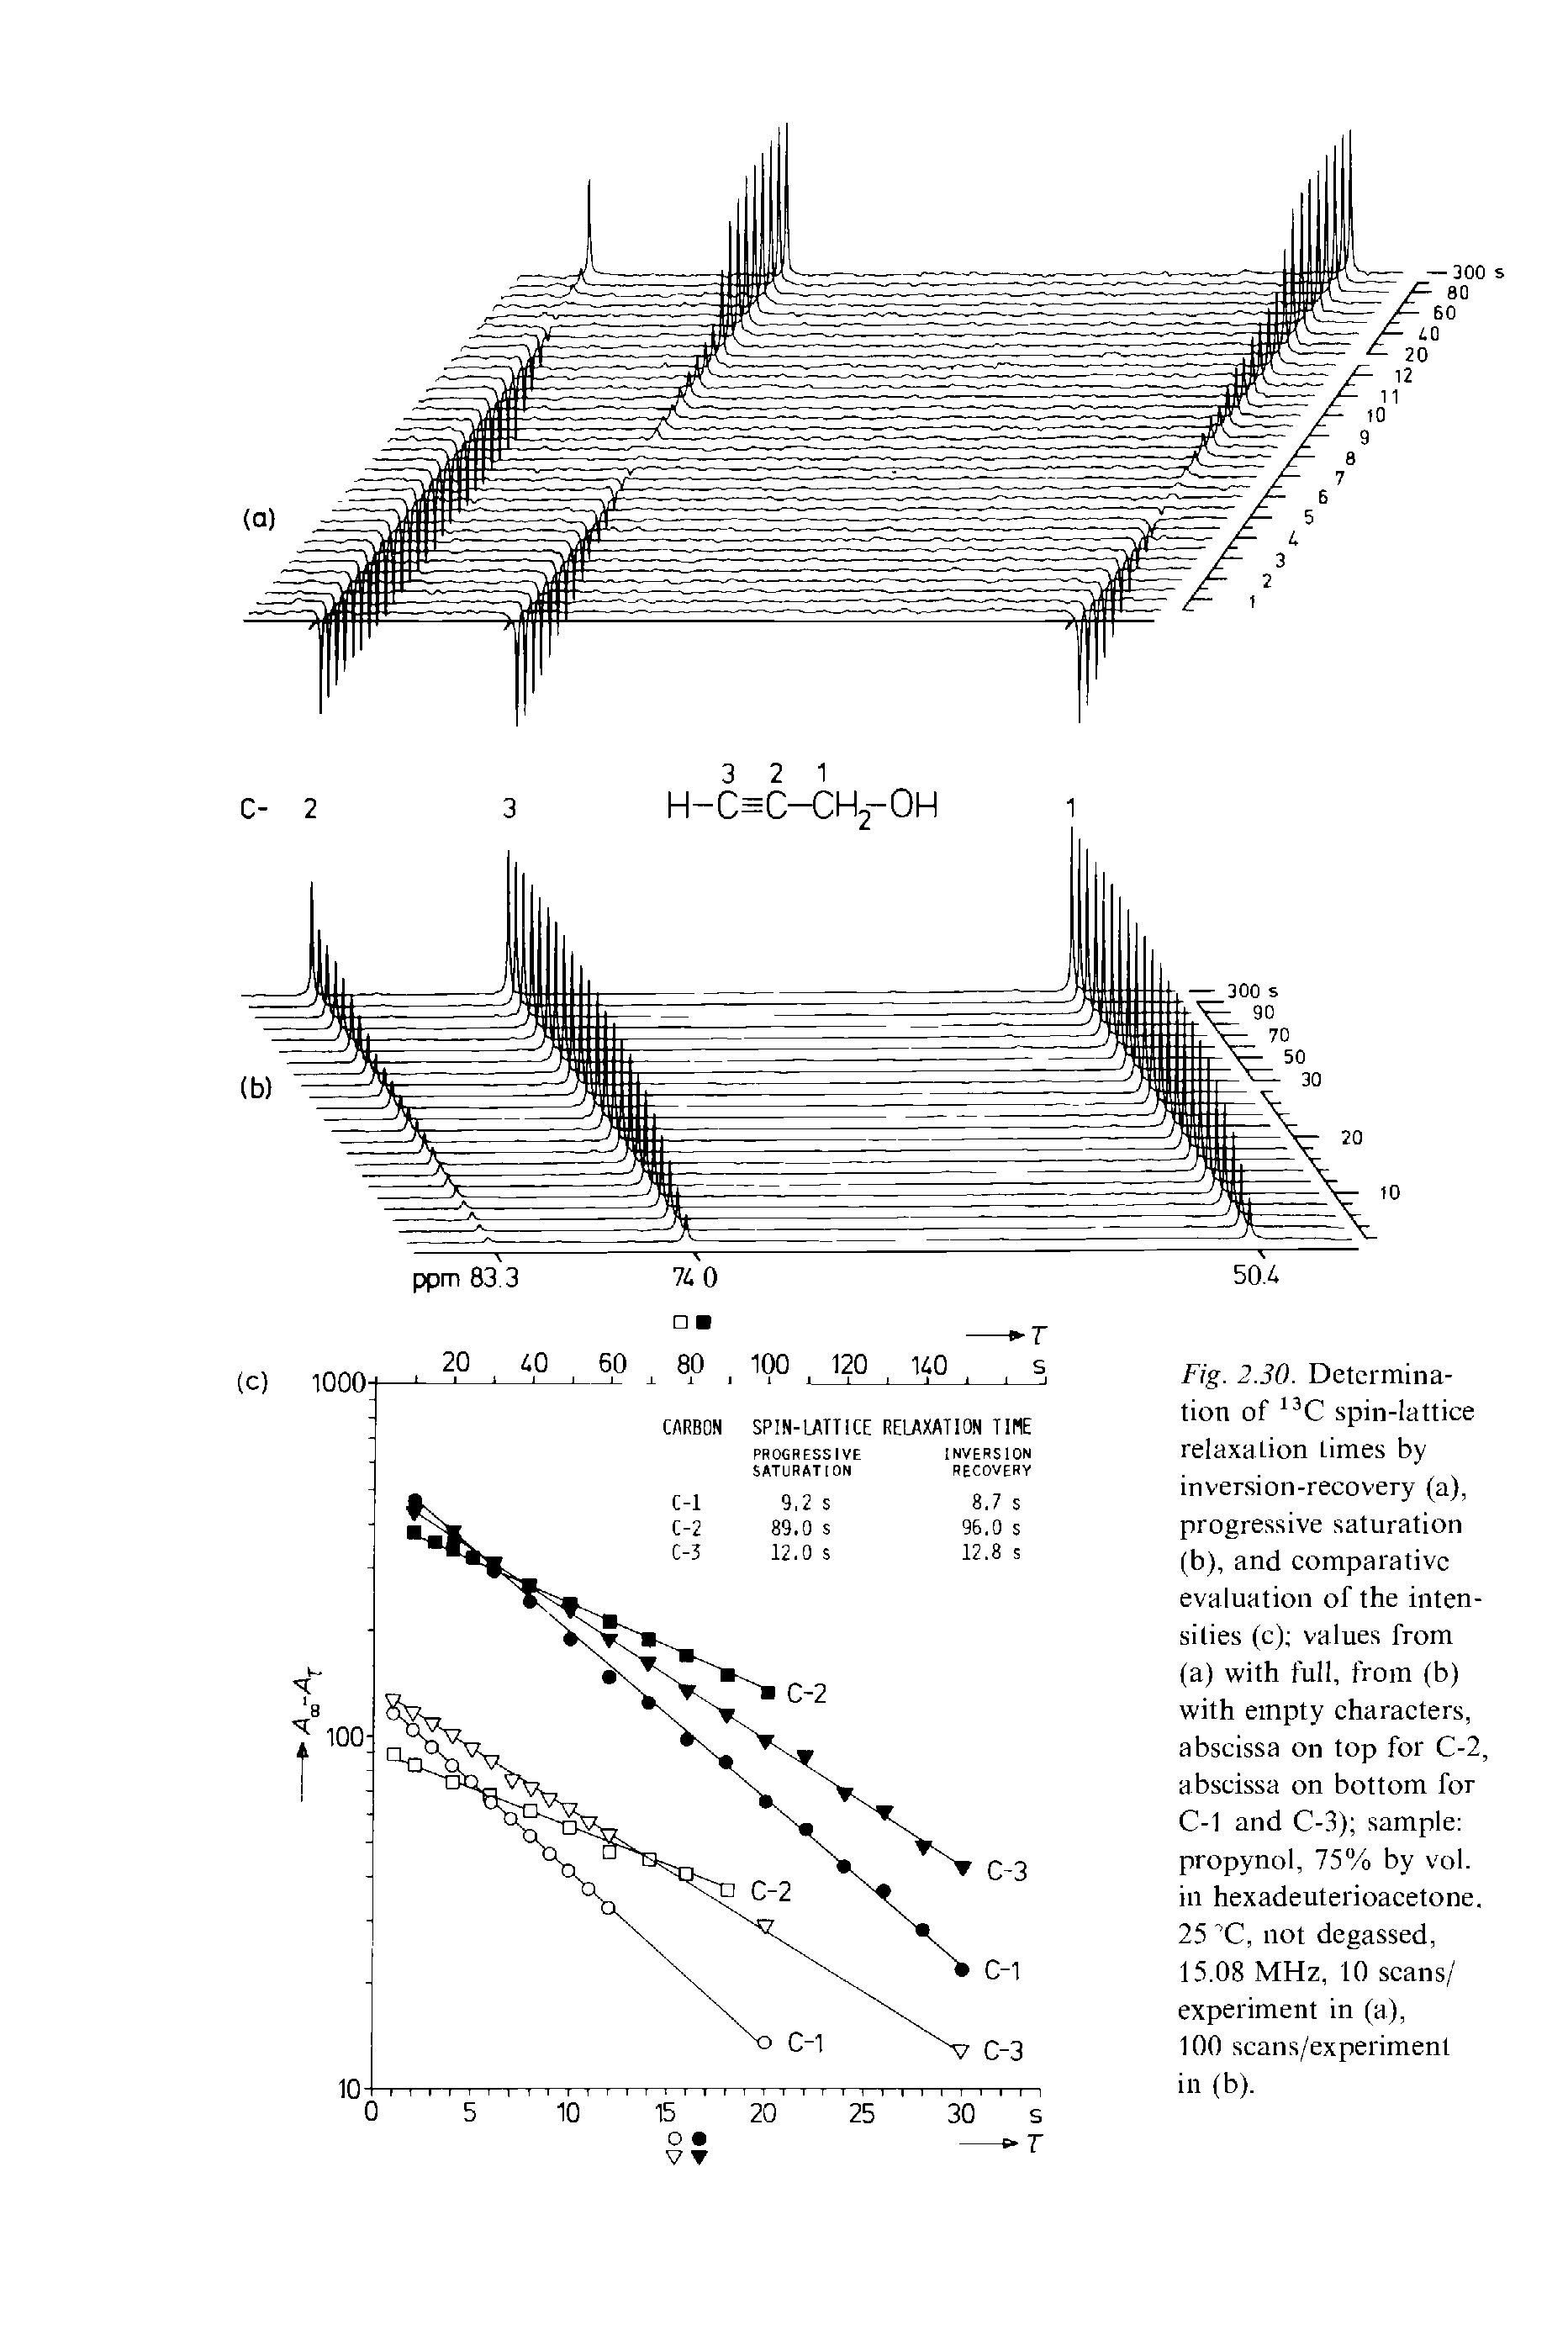 Fig. 2.30. Determination of 13C spin-lattice relaxation times by inversion-recovery (a), progressive saturation (b), and comparative evaluation of the intensities (c) values from (a) with full, from (b) with empty characters, abscissa on top for C-2, abscissa on bottom for C-1 and C-3) sample propynol, 75% by vol. in hexadeuterioacetone. 25 C, not degassed, 15.08 MHz, 10 scans/ experiment in (a),...